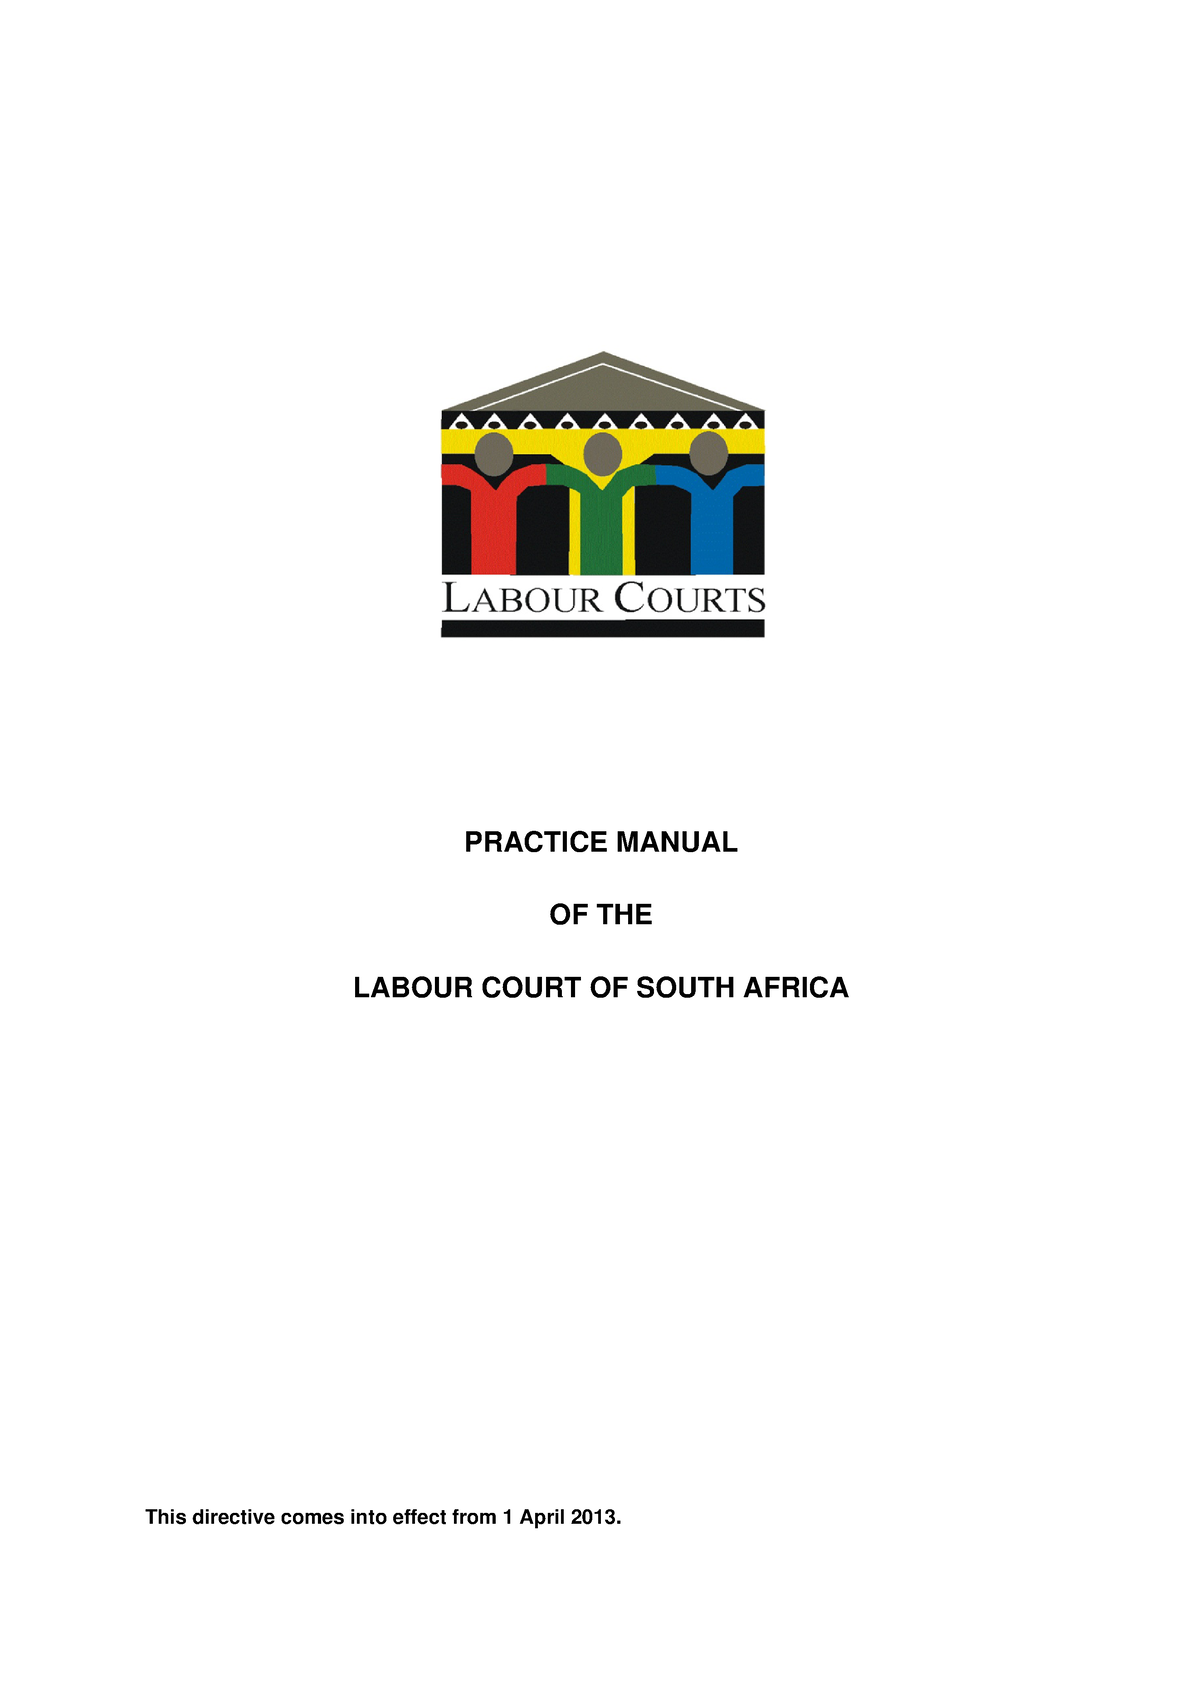 Labour Courts Practice Manual April 2013 PRACTICE MANUAL OF THE